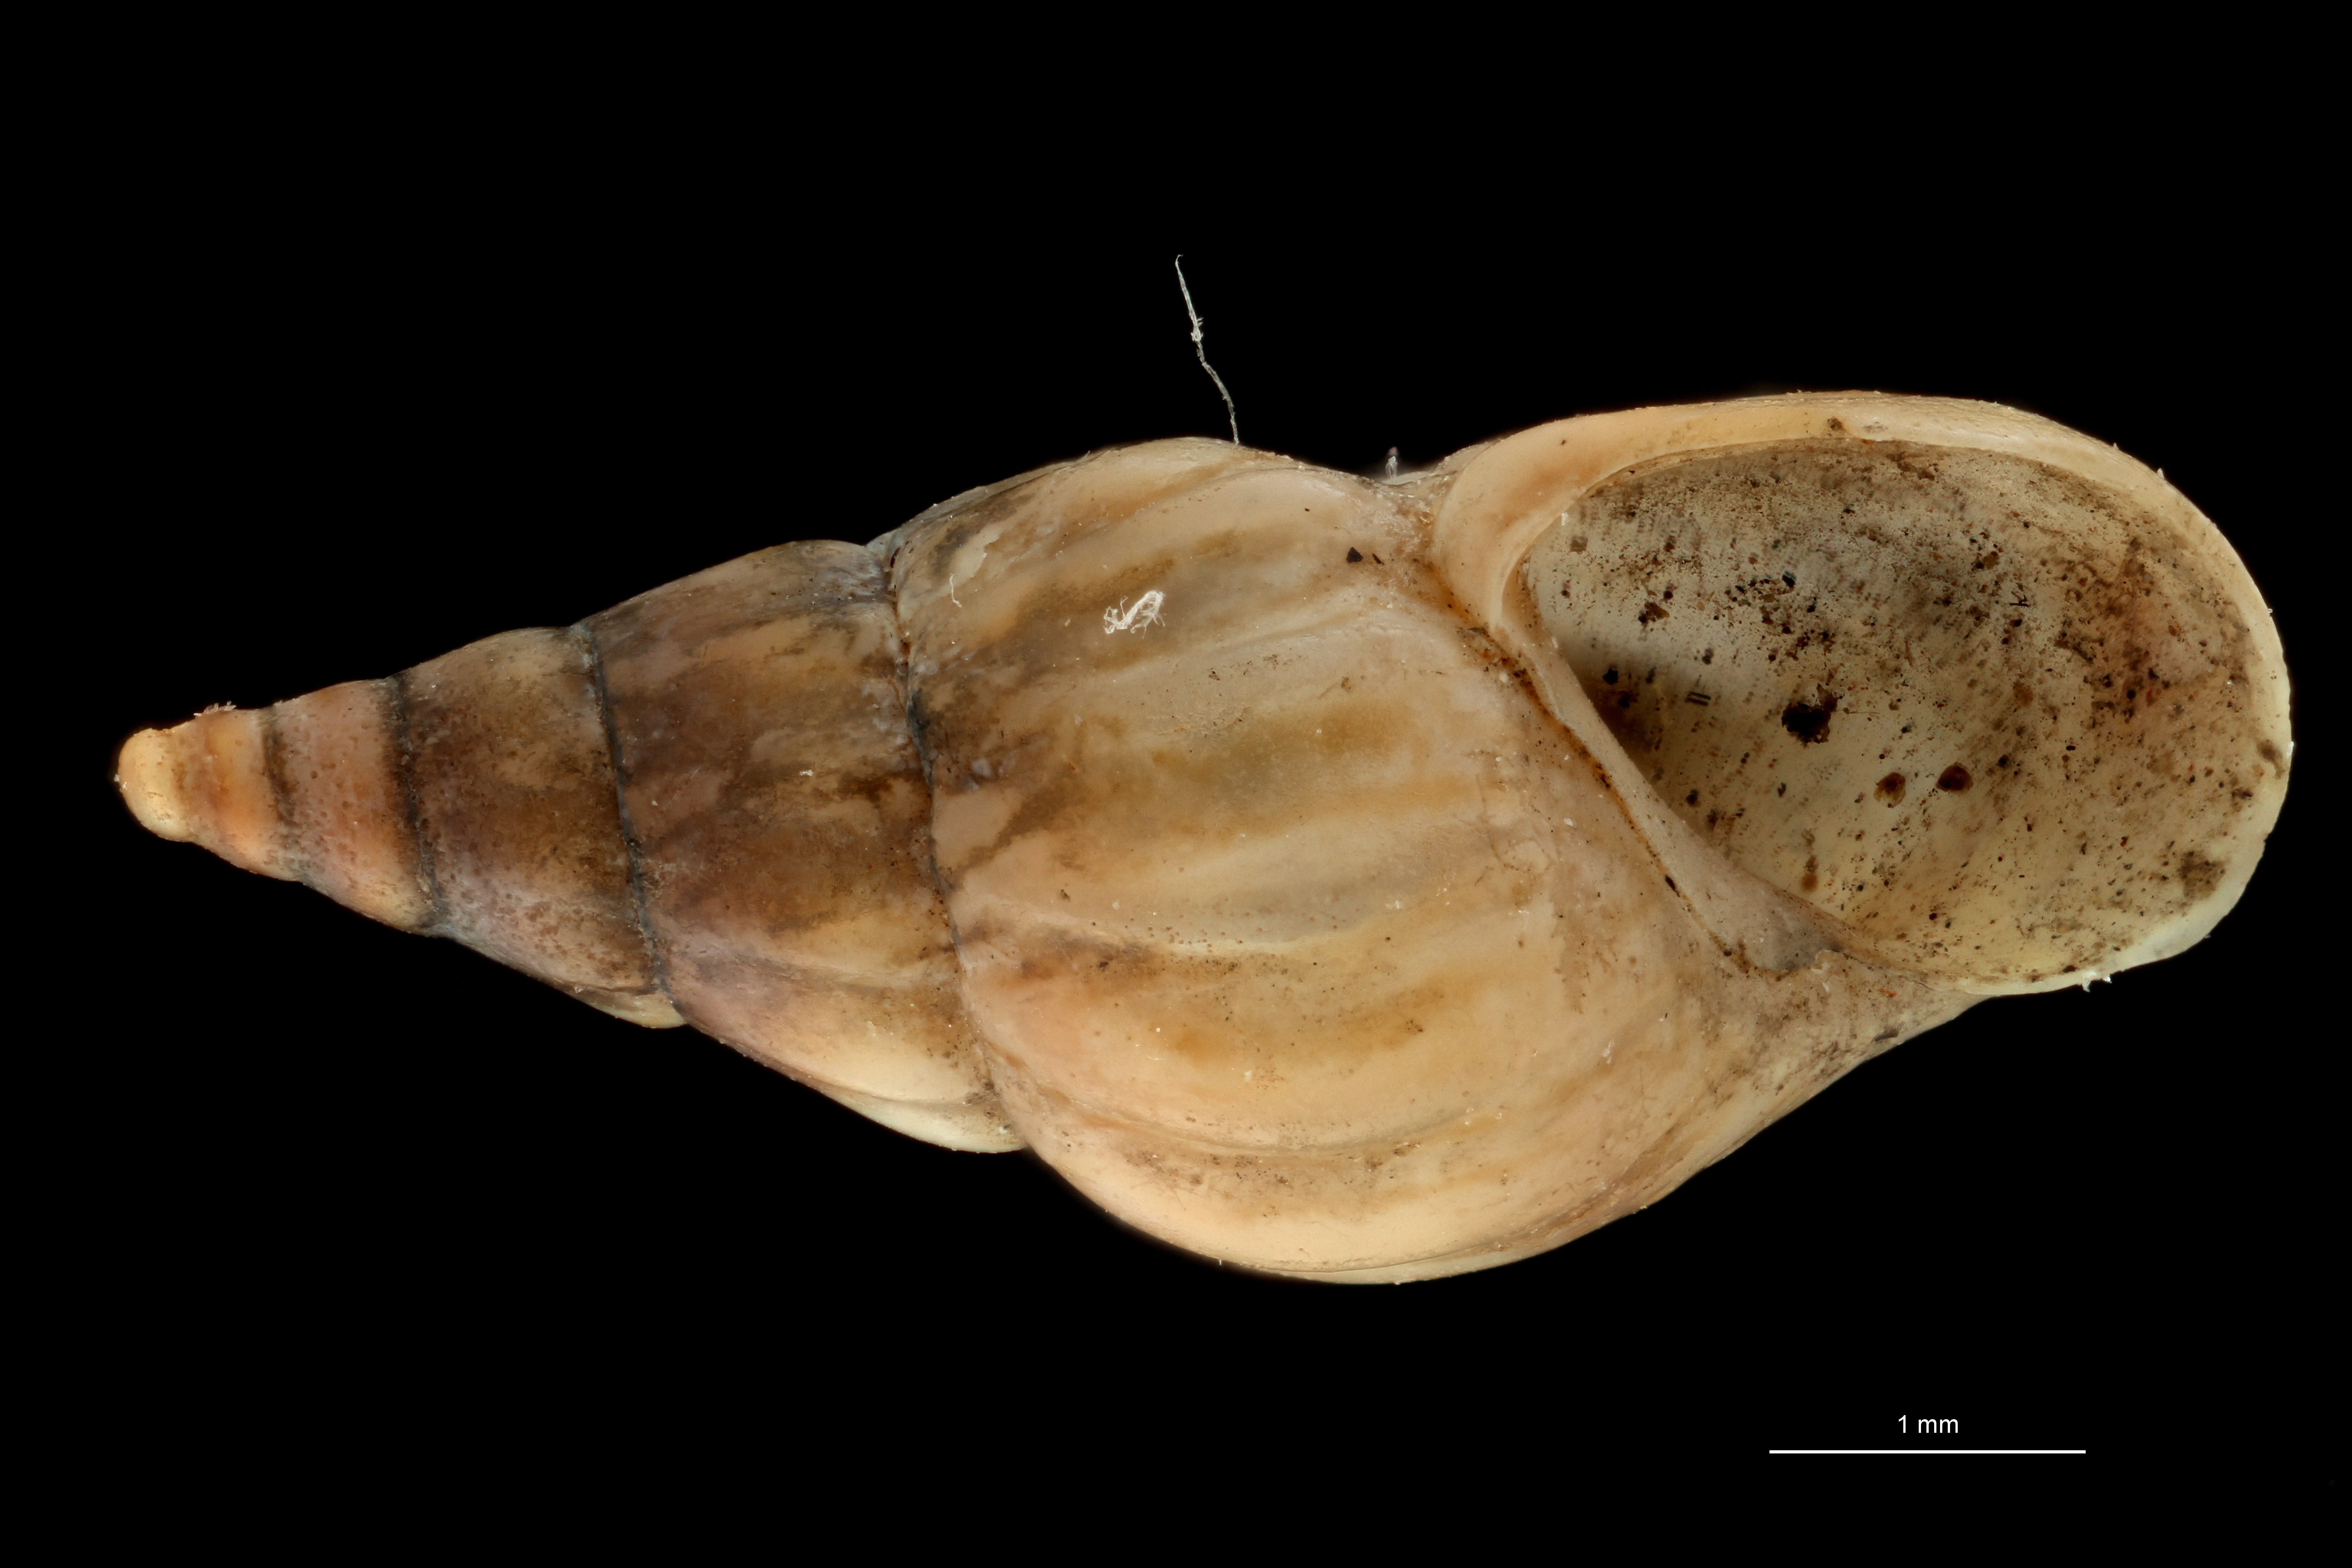 BE-RBINS-INV TYPE MT 589 Rissoa souleyetiana VENTRAL ZS PMax Scaled.jpg